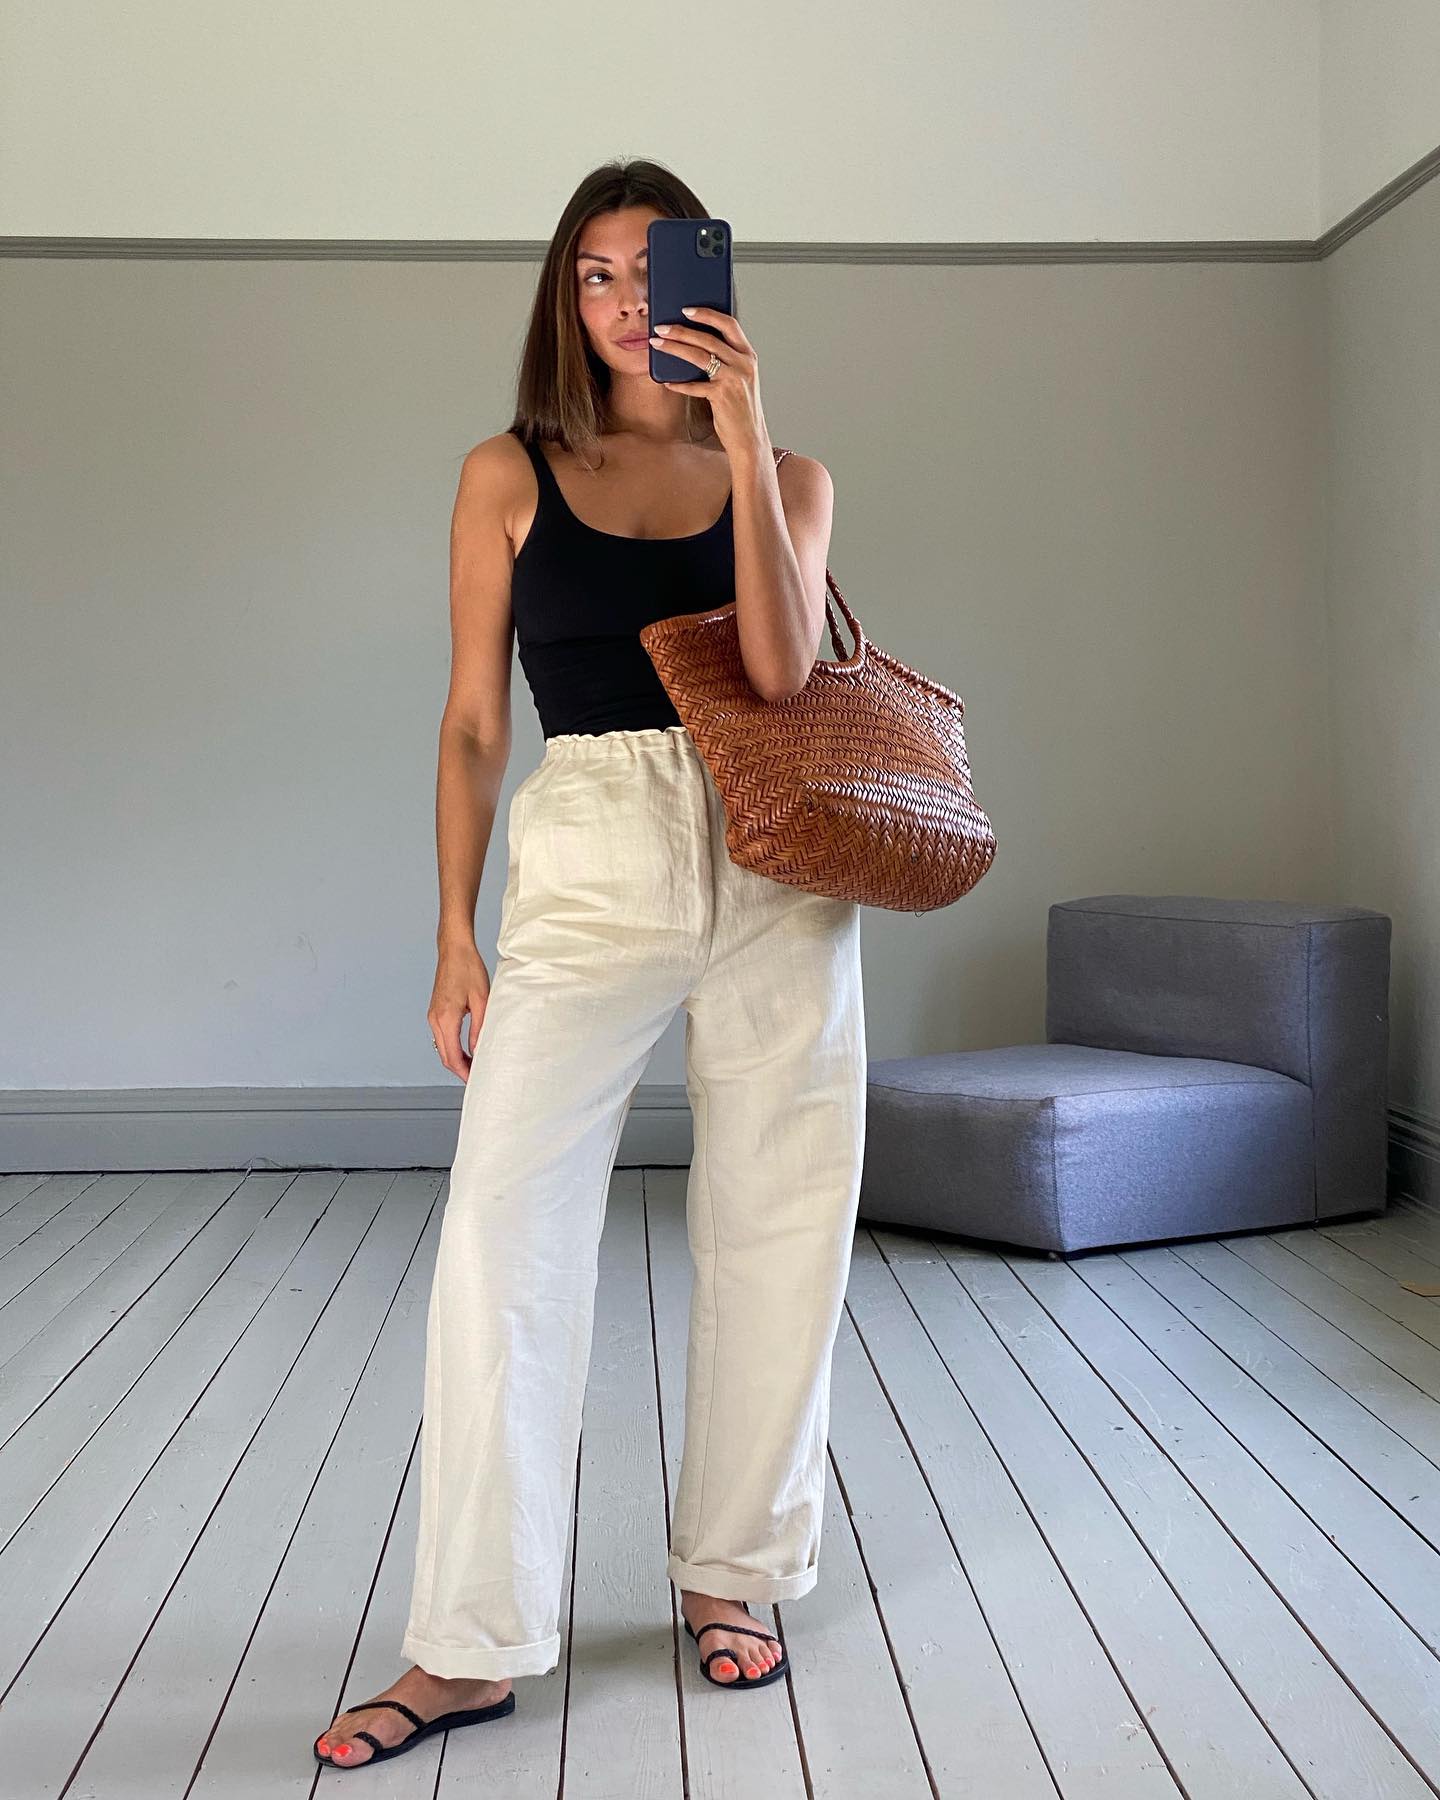 Influencer Marianne Smyth wearing a black tank top, Dragon Diffusion woven leather tote bag, pull-on white linen pants, and black strappy sandals.